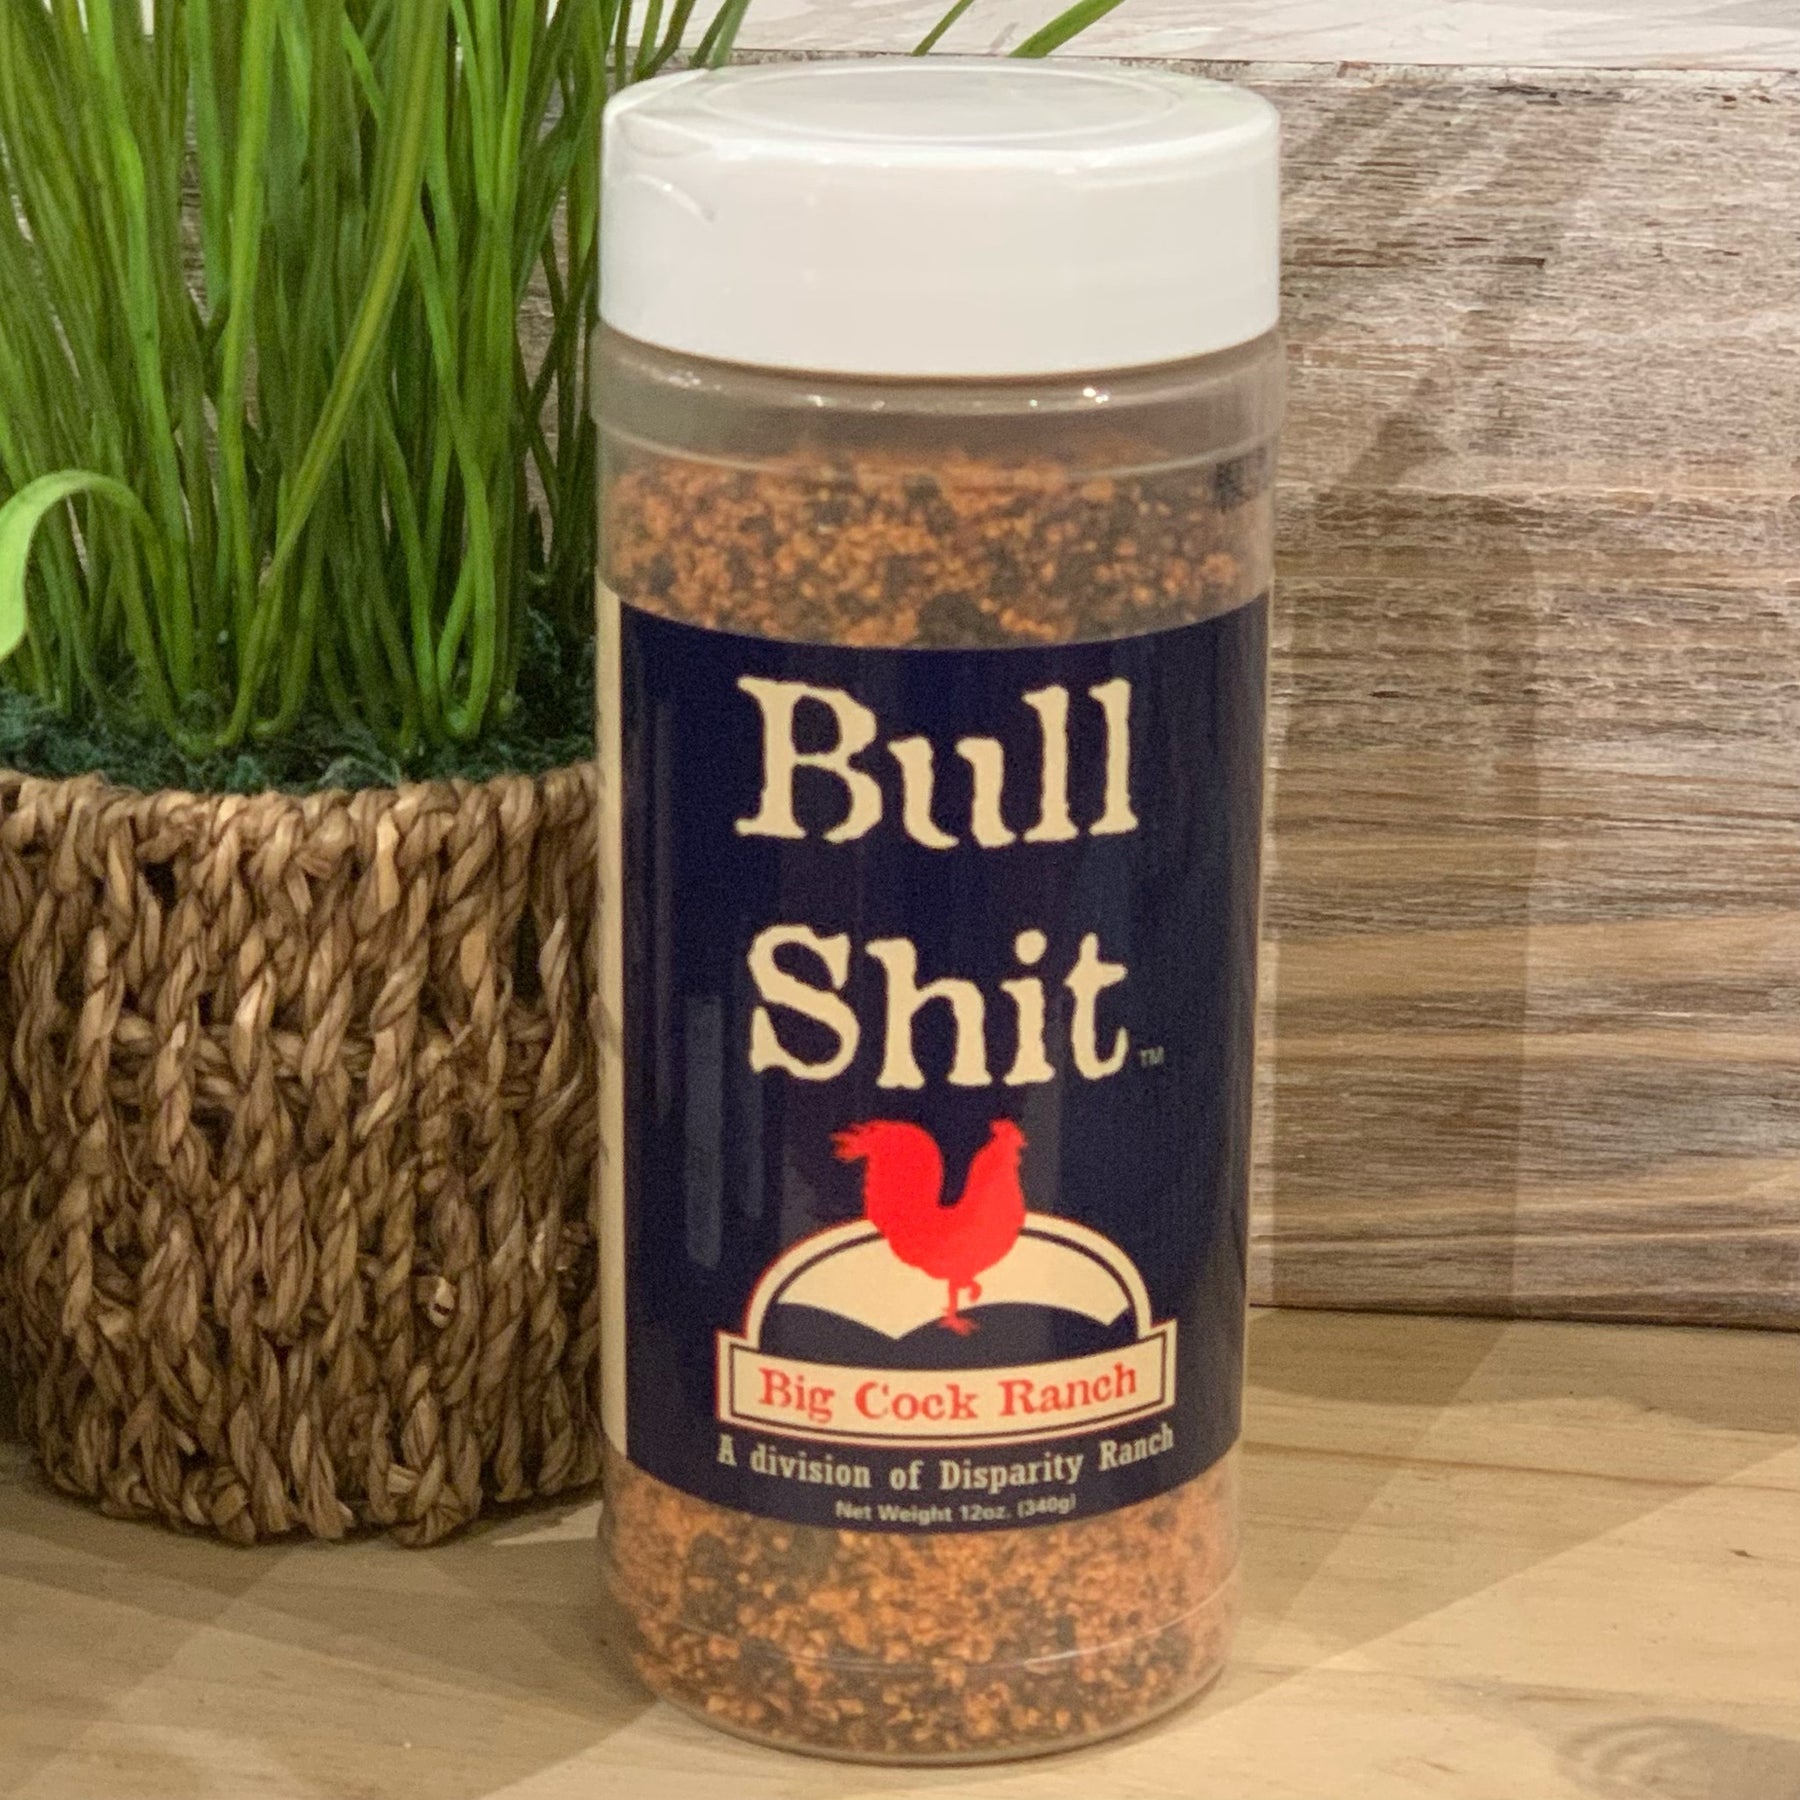 Big Cock Ranch All This Shit Combo Pack All Purpose Seasonings